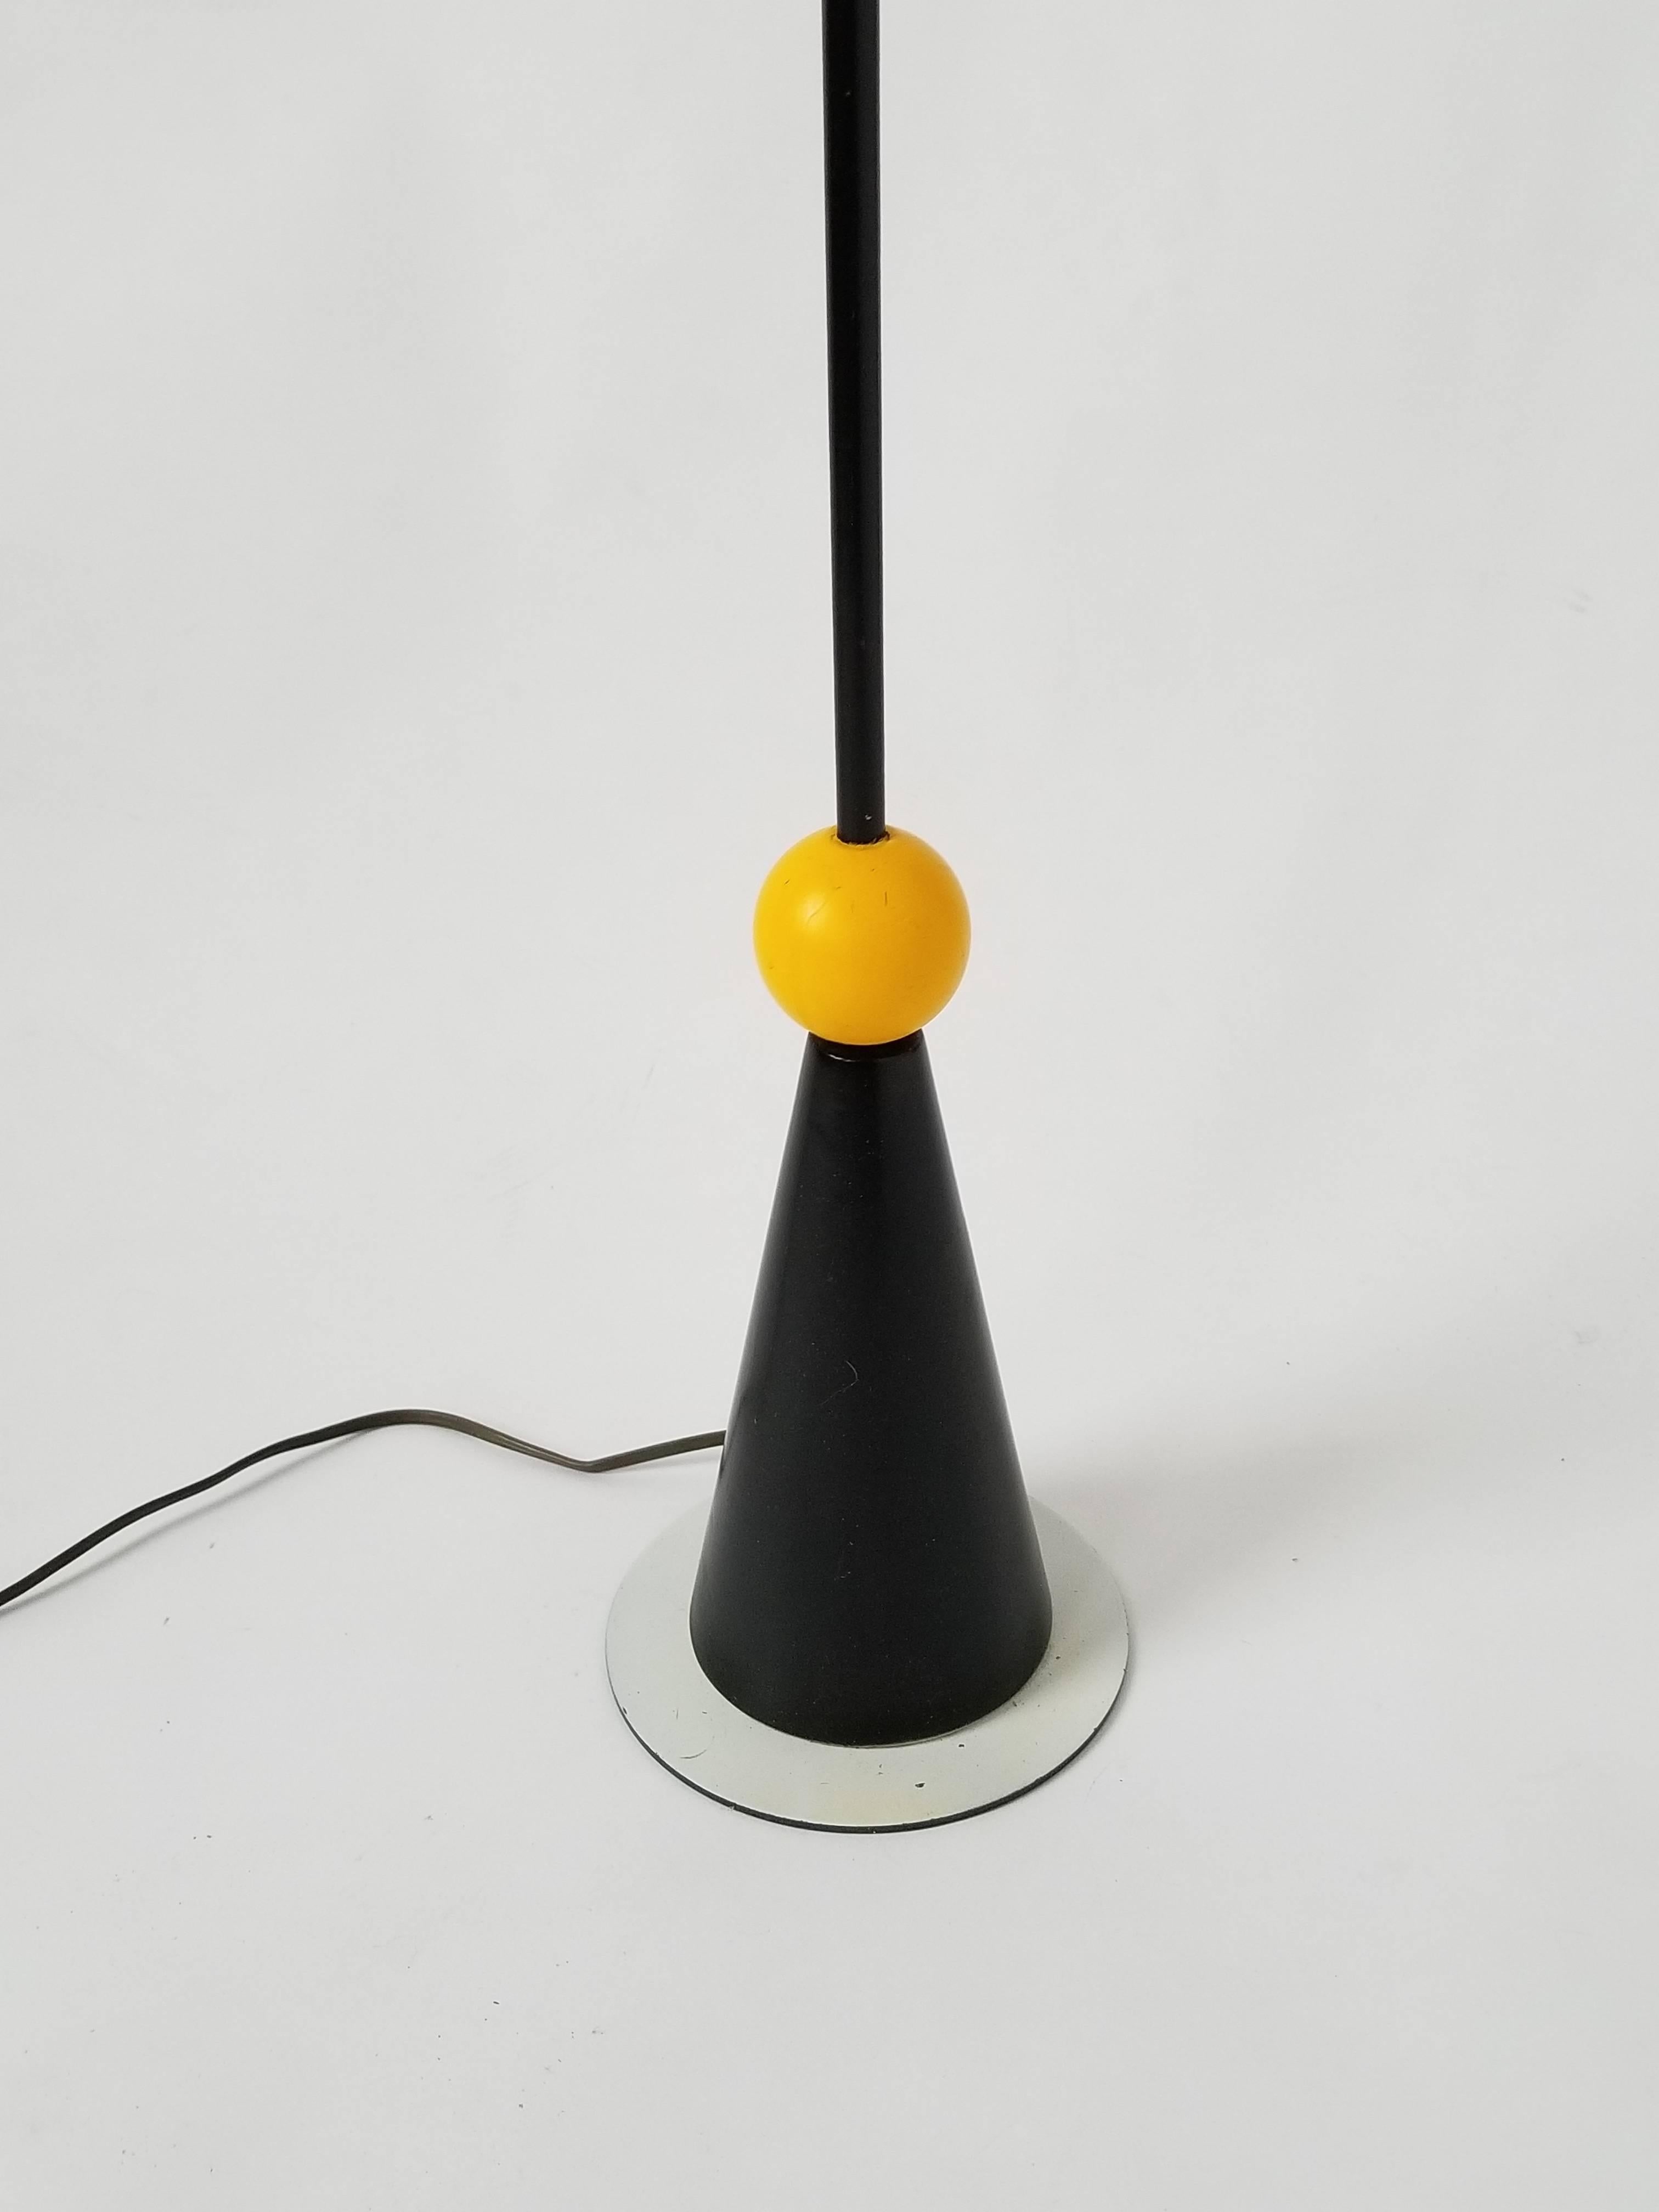 Memphis inspired, colorful bold floor lamp with personality .

Glass shade, enameled black metal stem  , lacquered wooden ball. 

Measure: 48 inches high. 

Contain two candelabra E12 size socket.